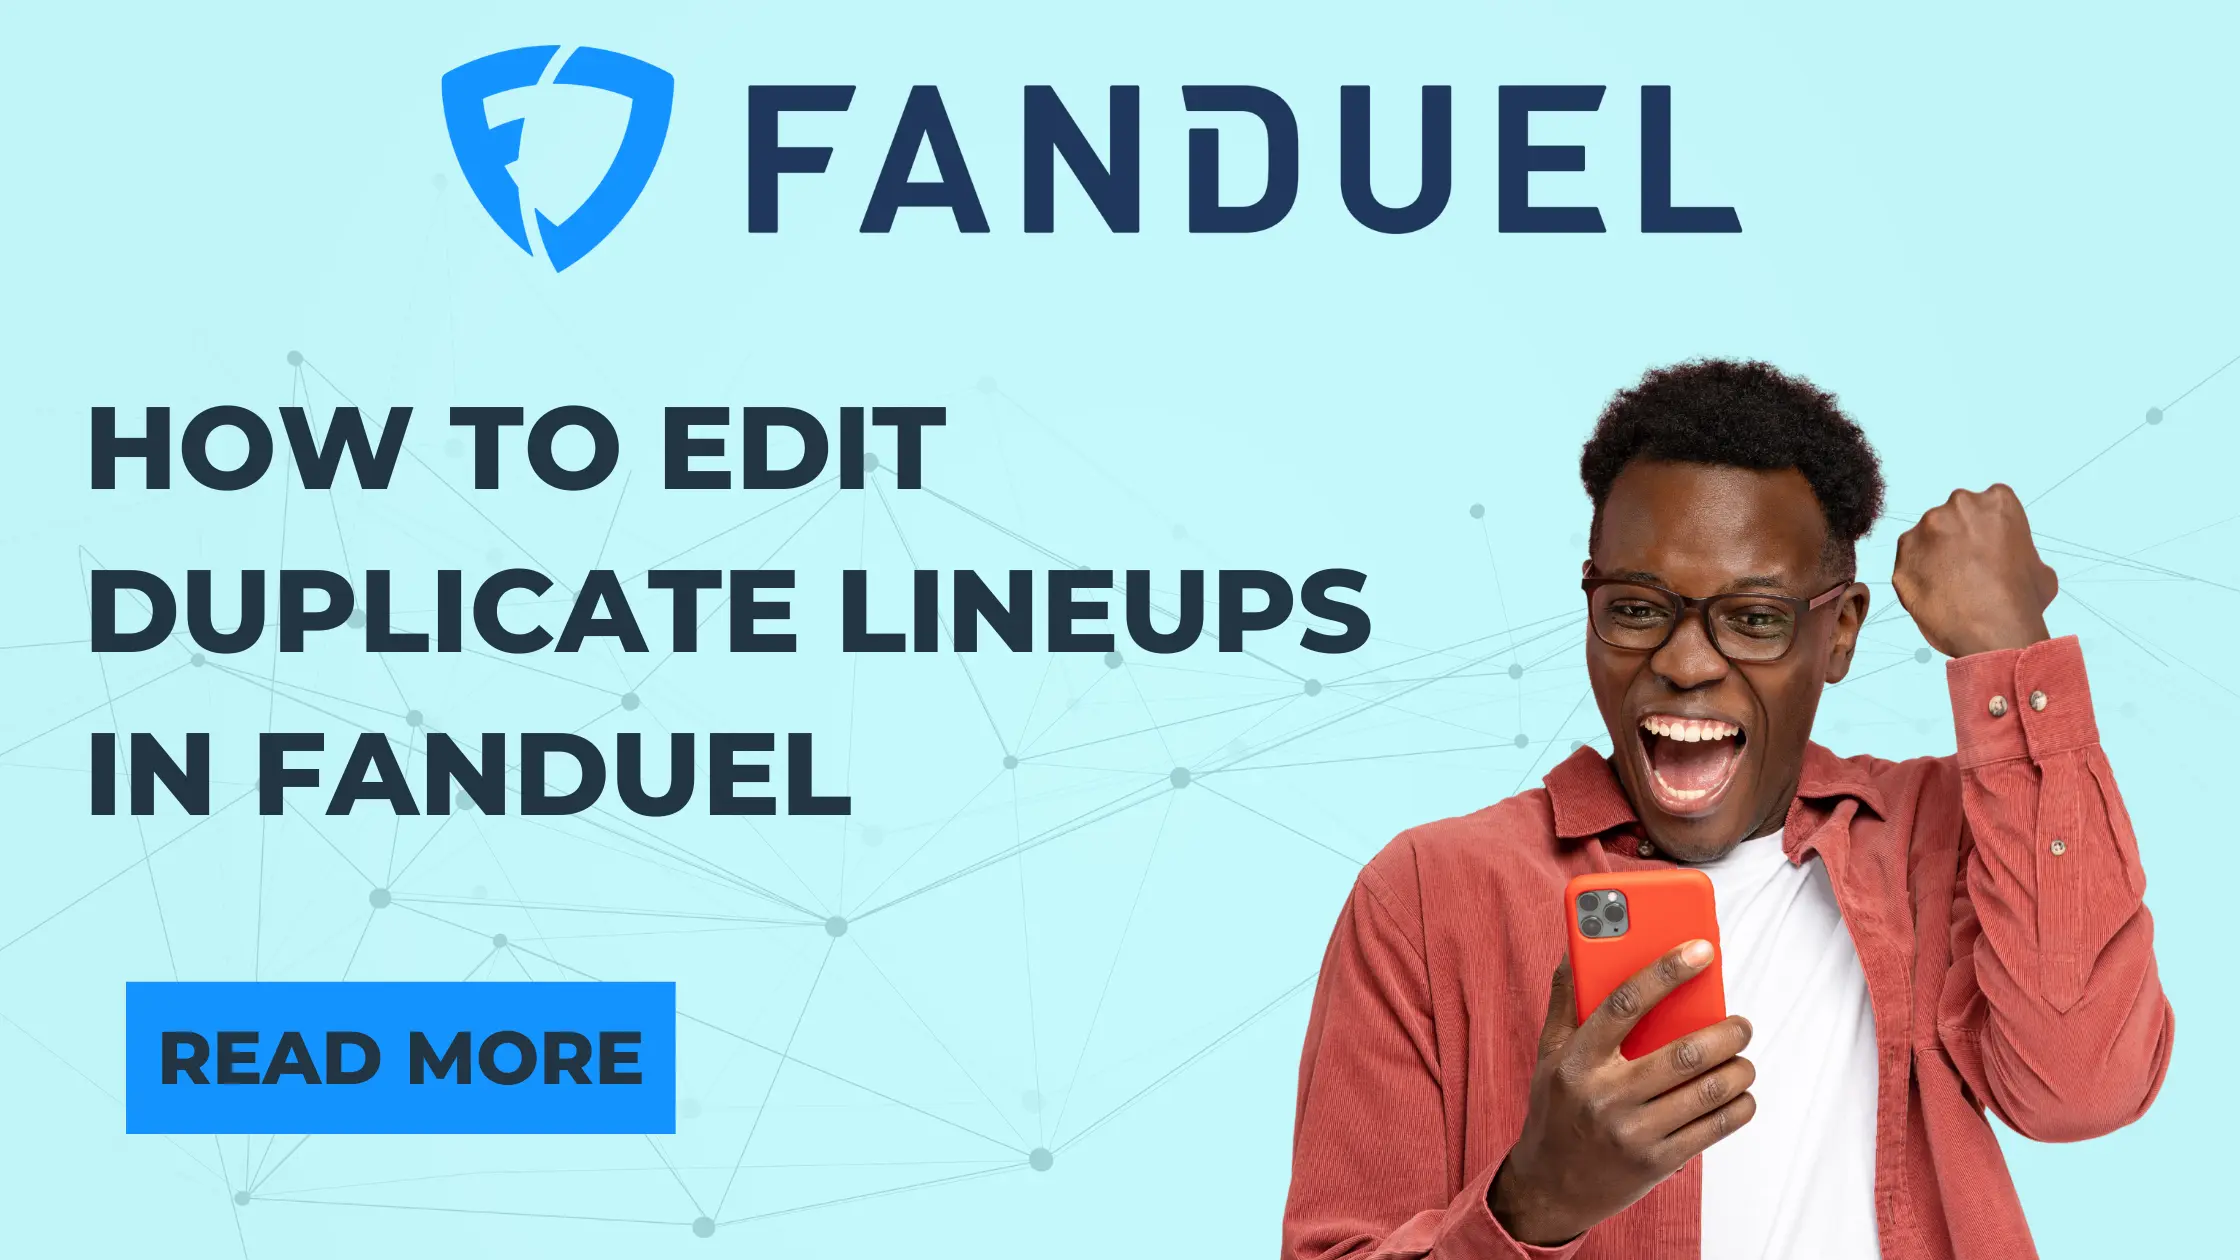 Mastering FanDuel: A Step-by-Step Guide to Editing Duplicate and Regular Lineups